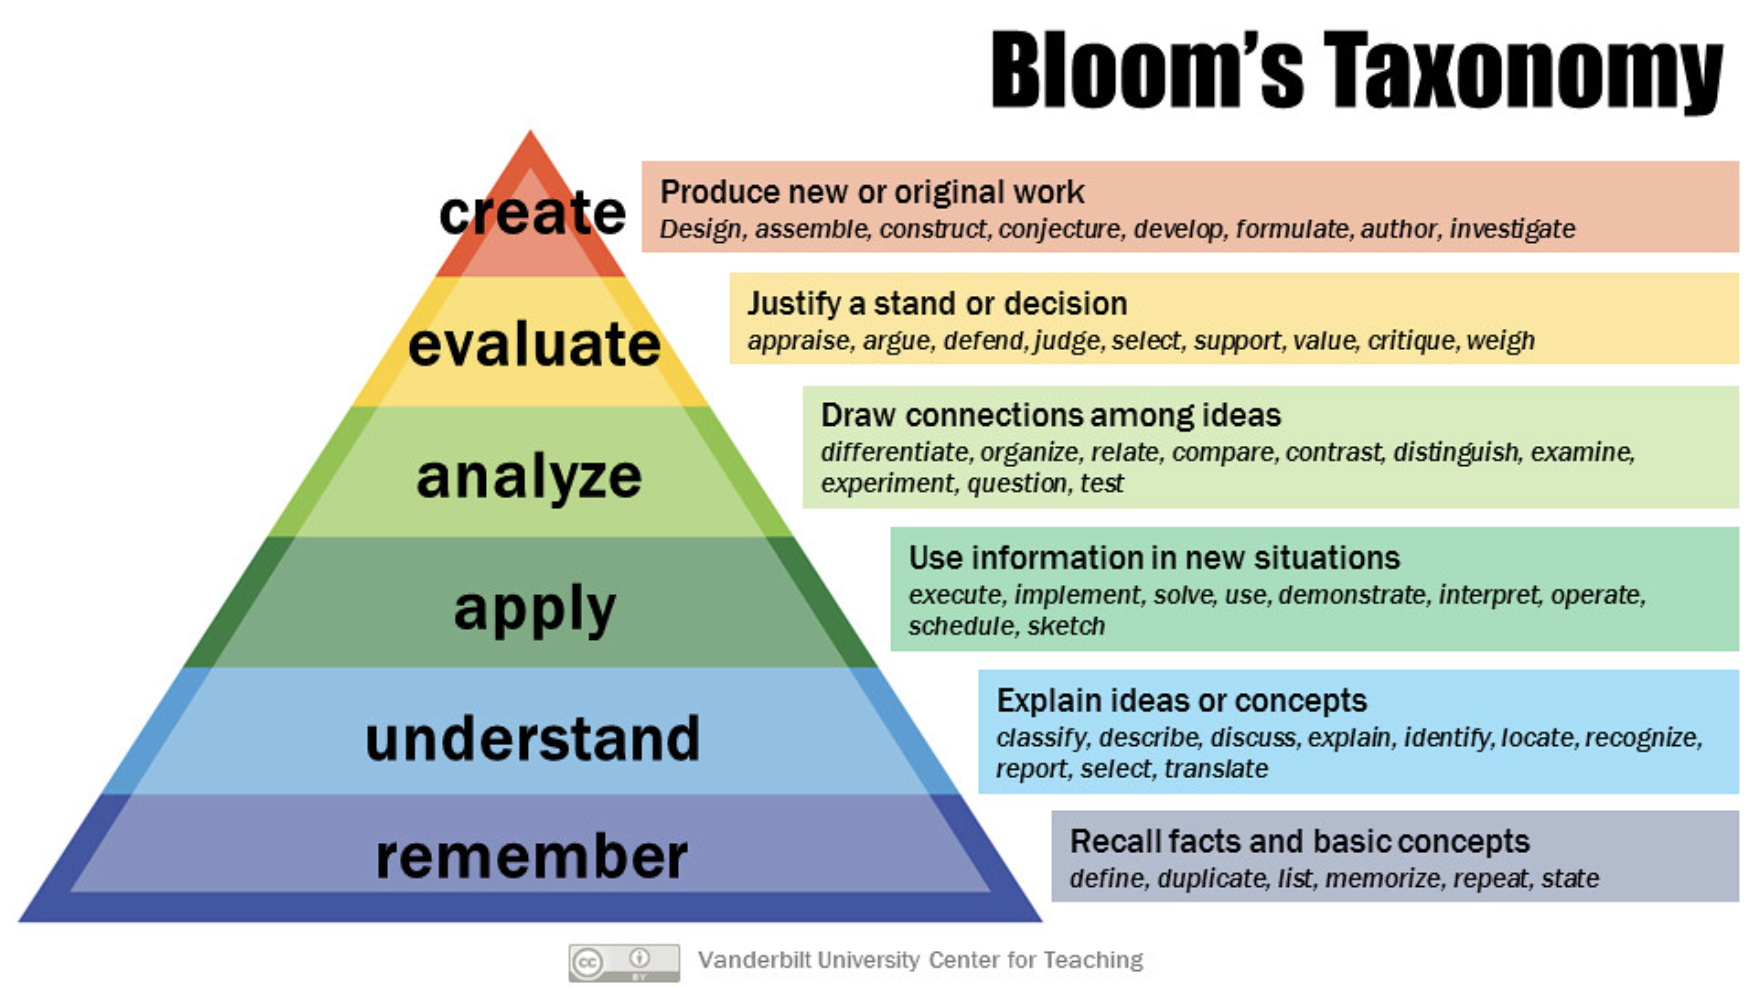 Categories of Bloom's taxonomy. (1) Remember: Recall facts and basic concepts (define, duplicate, list, memorize, repeat, state). (2) Understand: Explain ideas or concepts (classify, describe, discuss, explain, identify, locate, recognize, report, select, translate). (3) Apply: Use information in new situations (execute, implement, solve, use, demonstrate, interpret, operate, schedule, sketch). (4) Analyze: Draw connections among ideas (differentiate, organize, relate, compare, contrast, distinguish, examine, experiment, question, test). (5) Evaluate: Justify a stand or decision (appraise, argue, defend, judge, select, support, value, critique, weigh). (6) Create: Produce new or original work (design, assemble, construct, conjecture, develop, formulate, author, investigate).